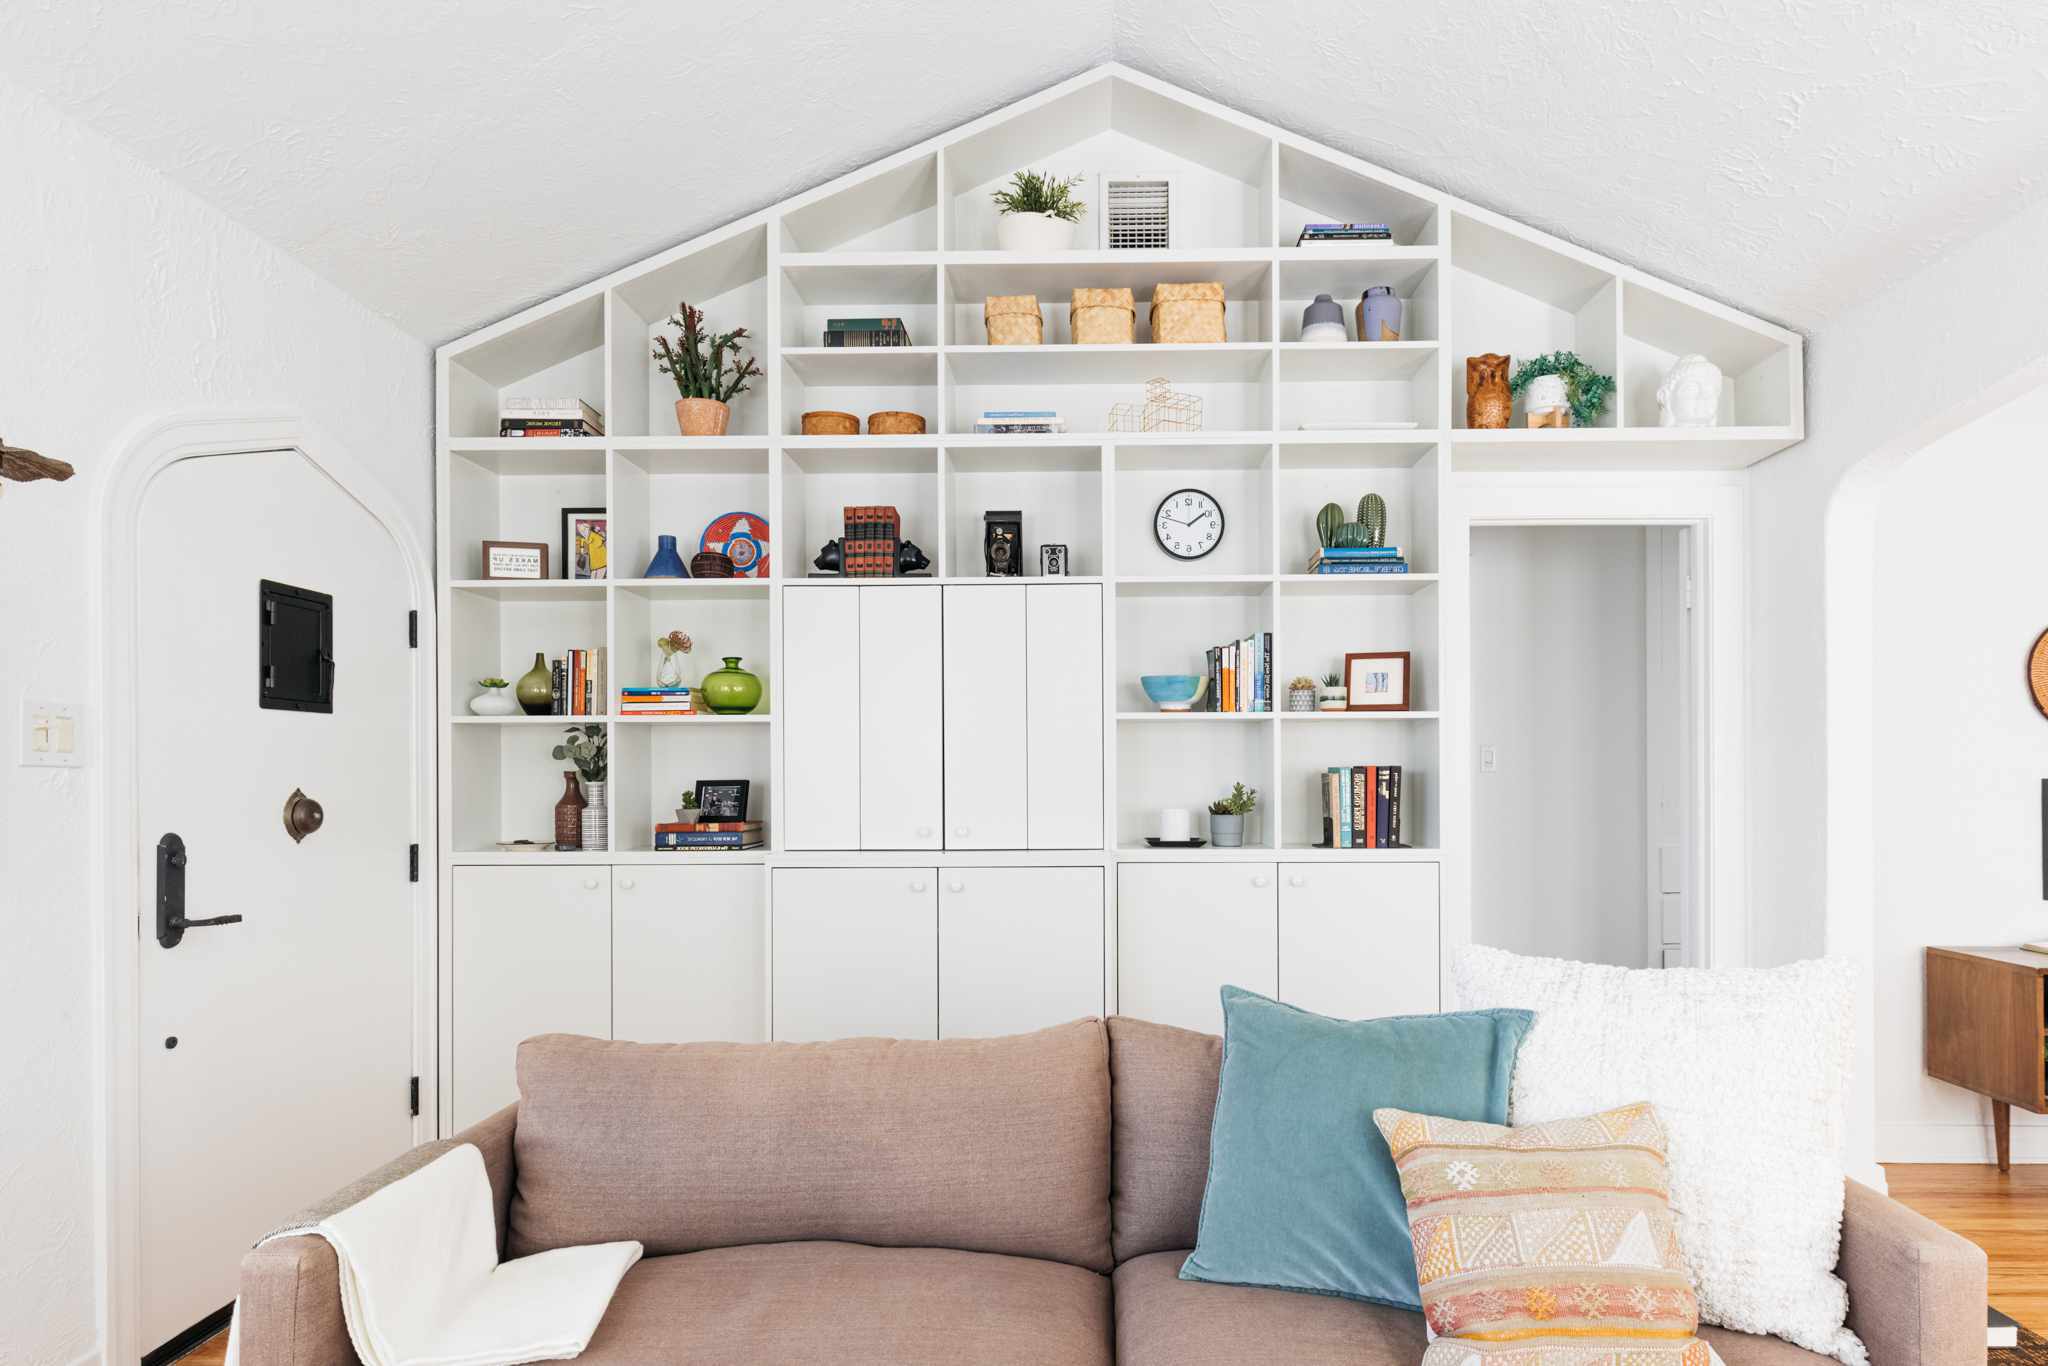 DIY: How To Build Stunning Built-In Bookshelves For Your Home